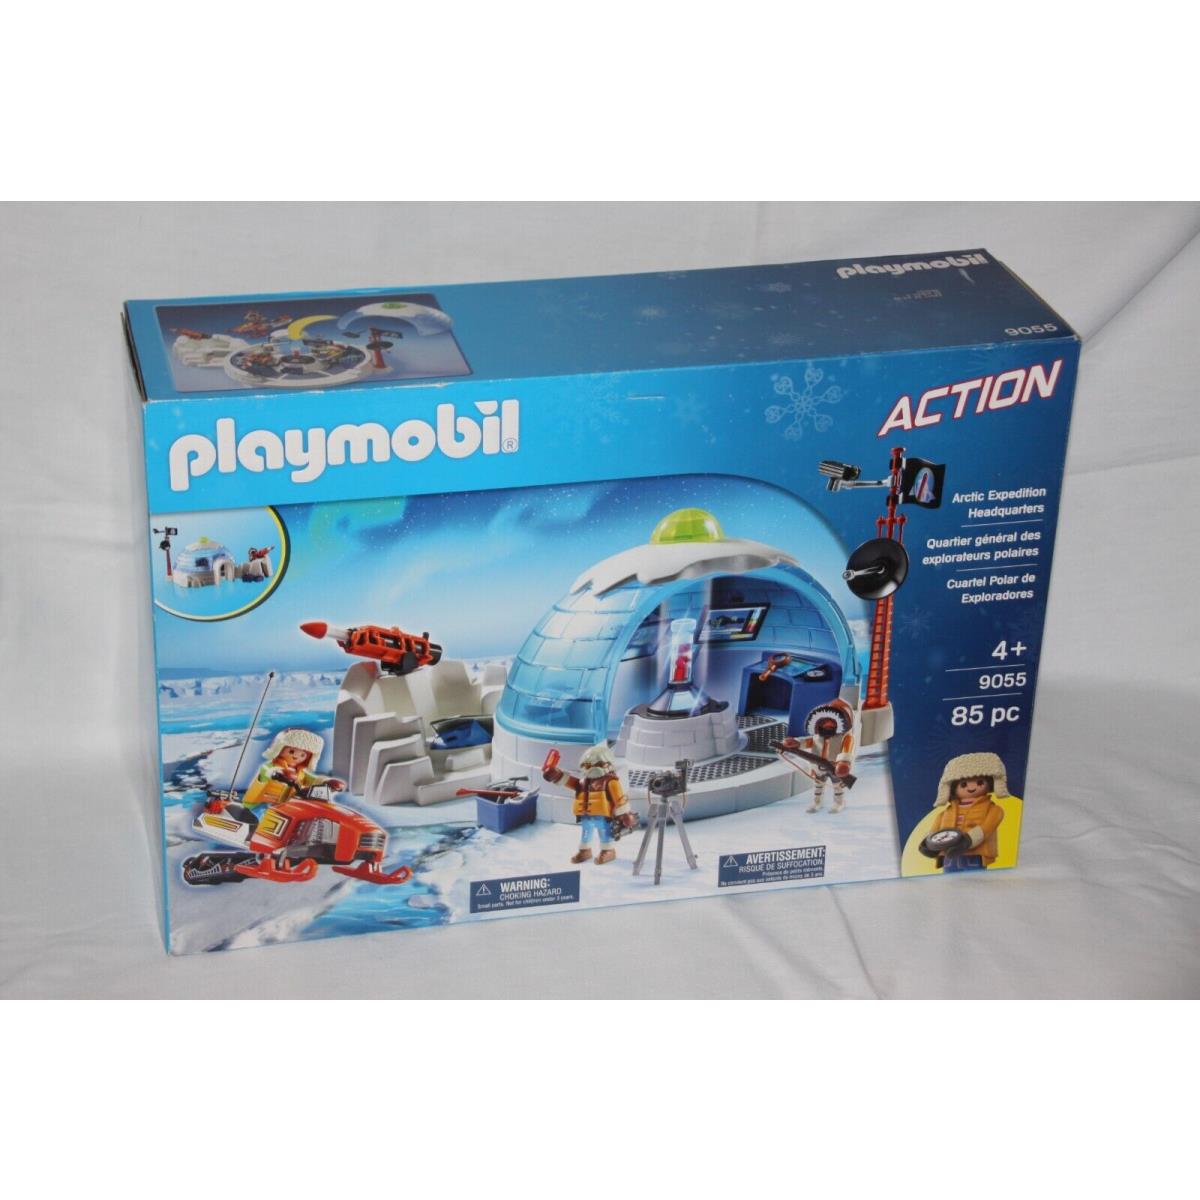 Playmobil Action 9055 Arctic Expedition Headquarters Igloo Snowmobile Box